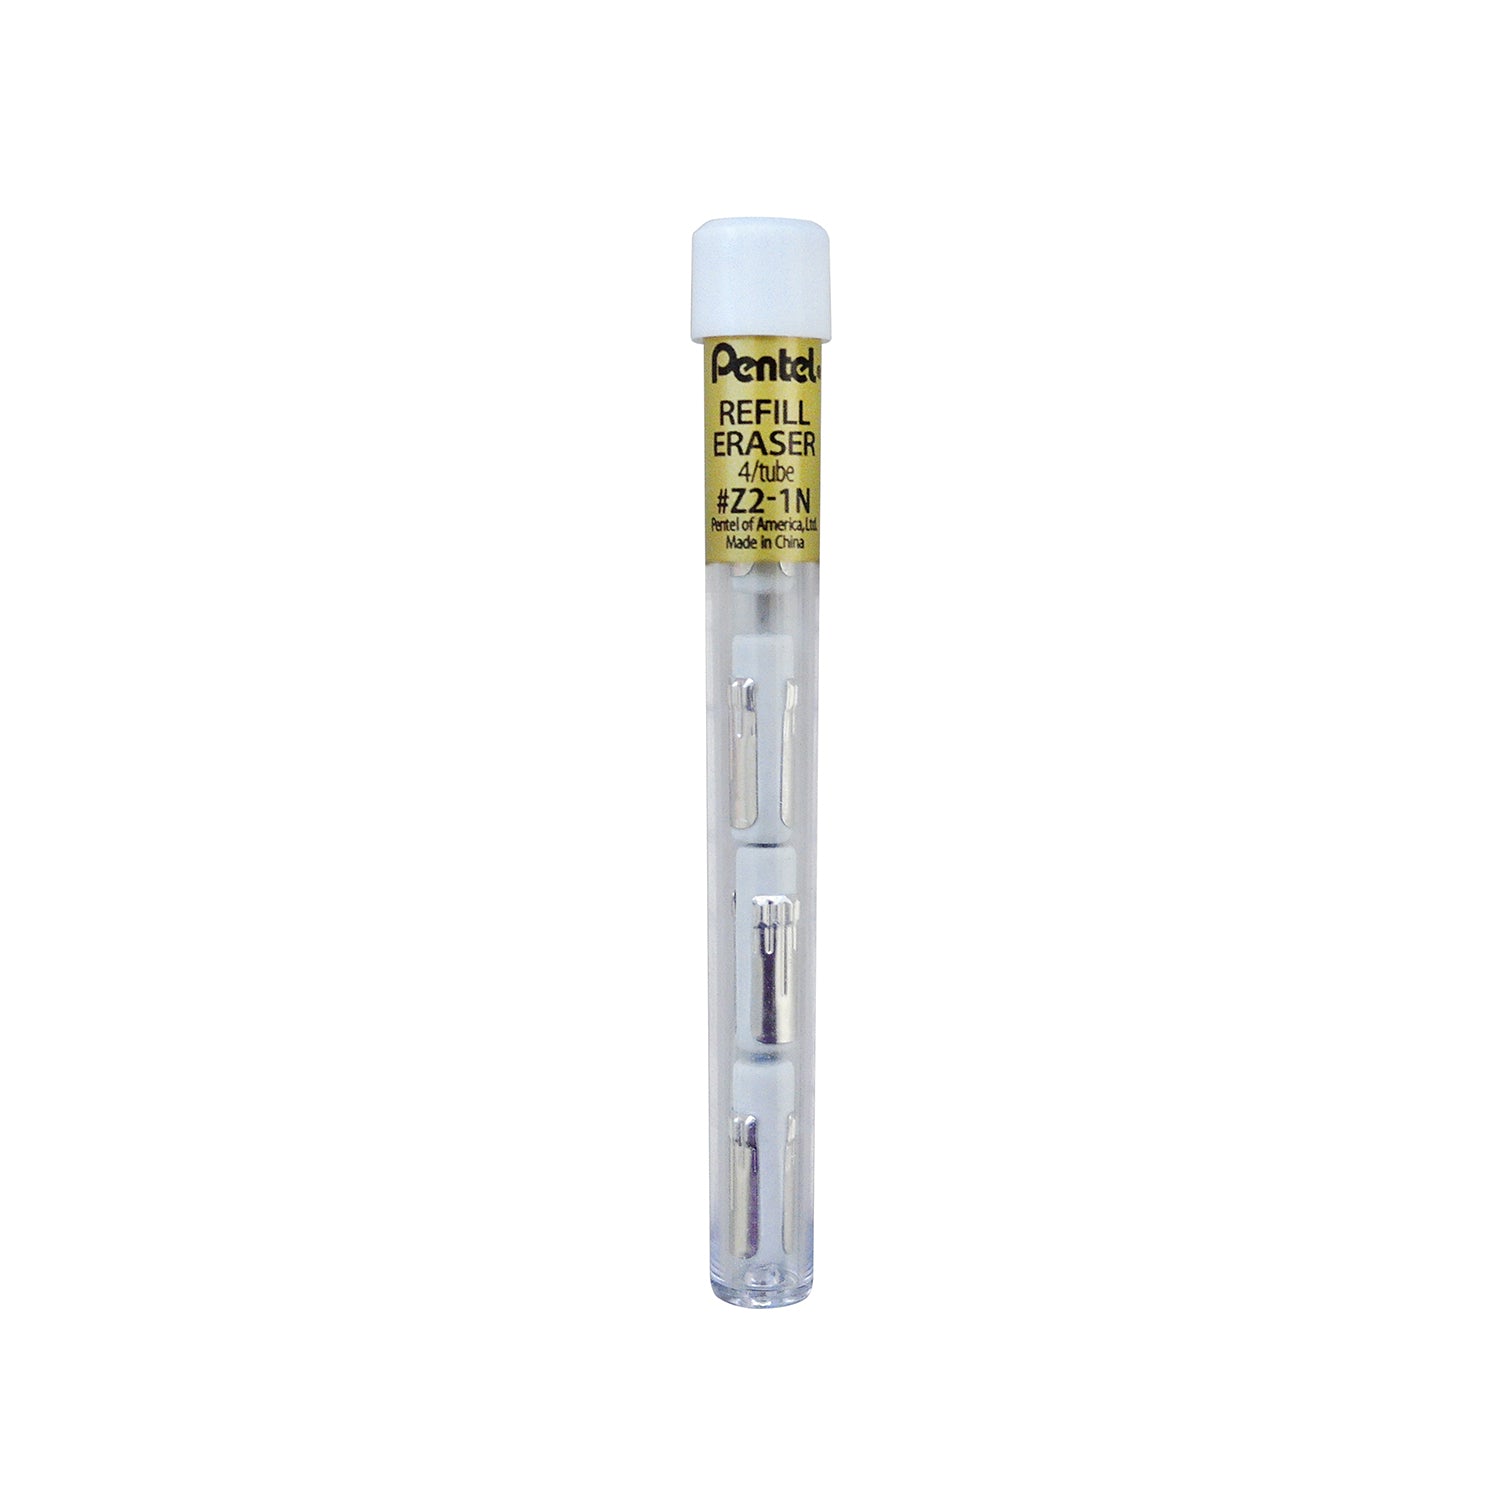 Pentel Z2-1N Refill Eraser for Mechanical Pencils -Drafting Accessories- eGPS Solutions Inc.